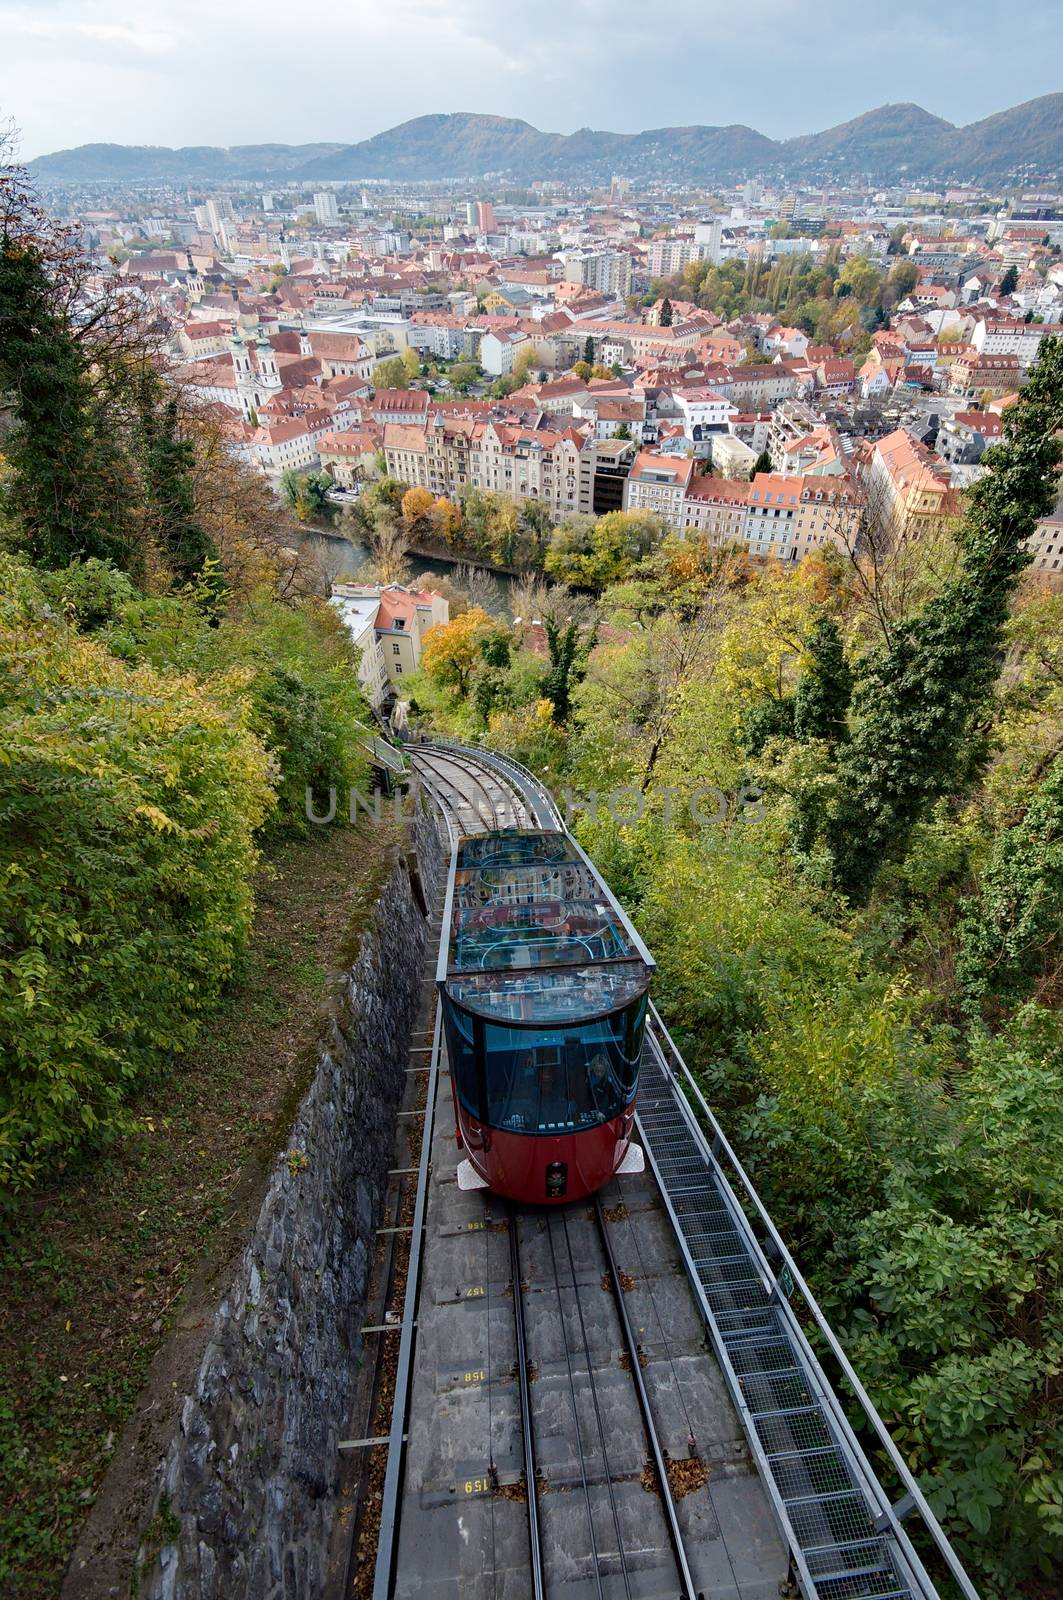 Red funicular in Graz, Austria by anderm